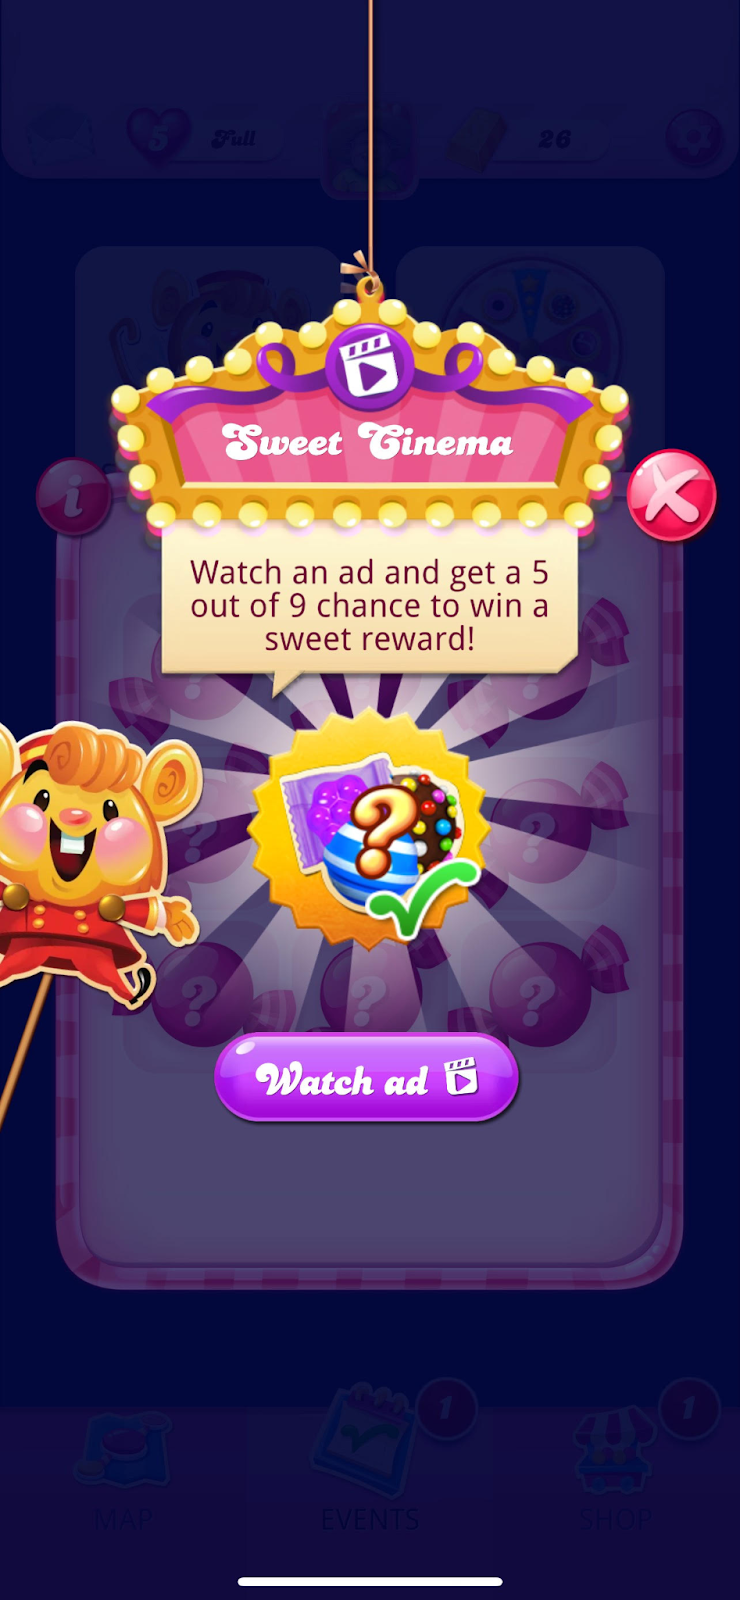 Screenshot of Candy Crush mobile app gamification